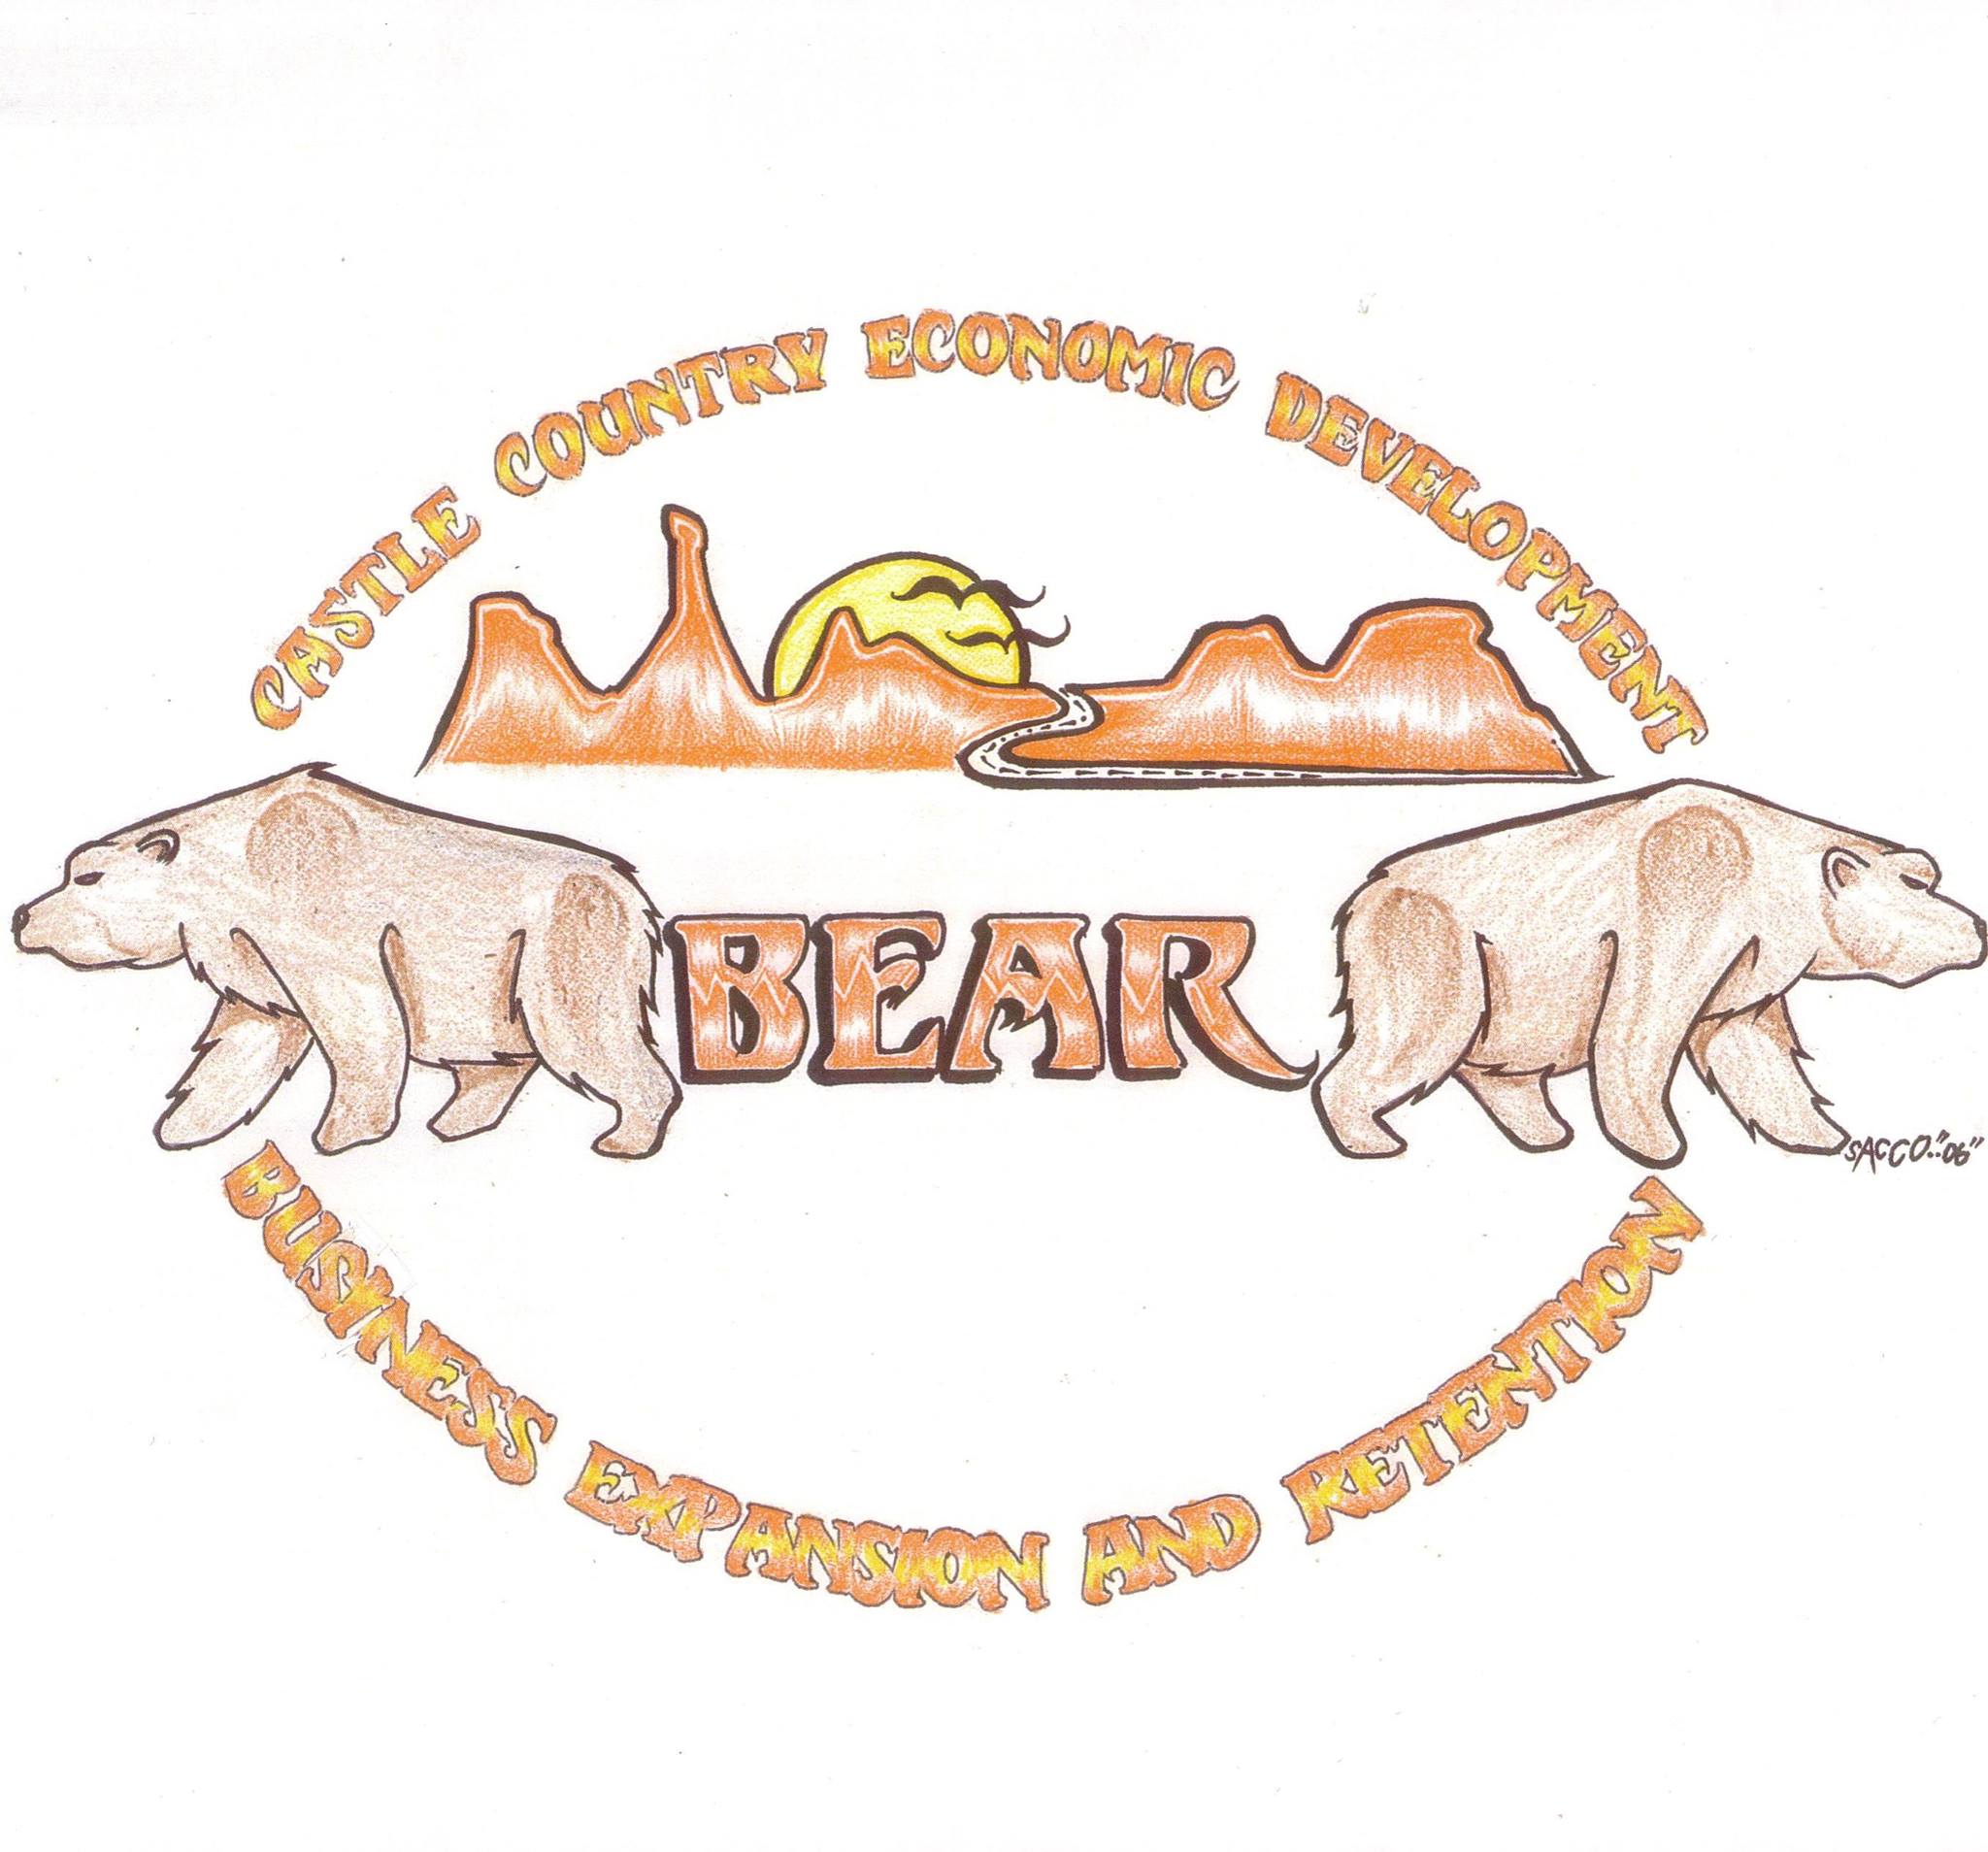 BEAR: Empowering Local Businesses in Carbon and Emery Counties through Collaborative Efforts in Economic Development